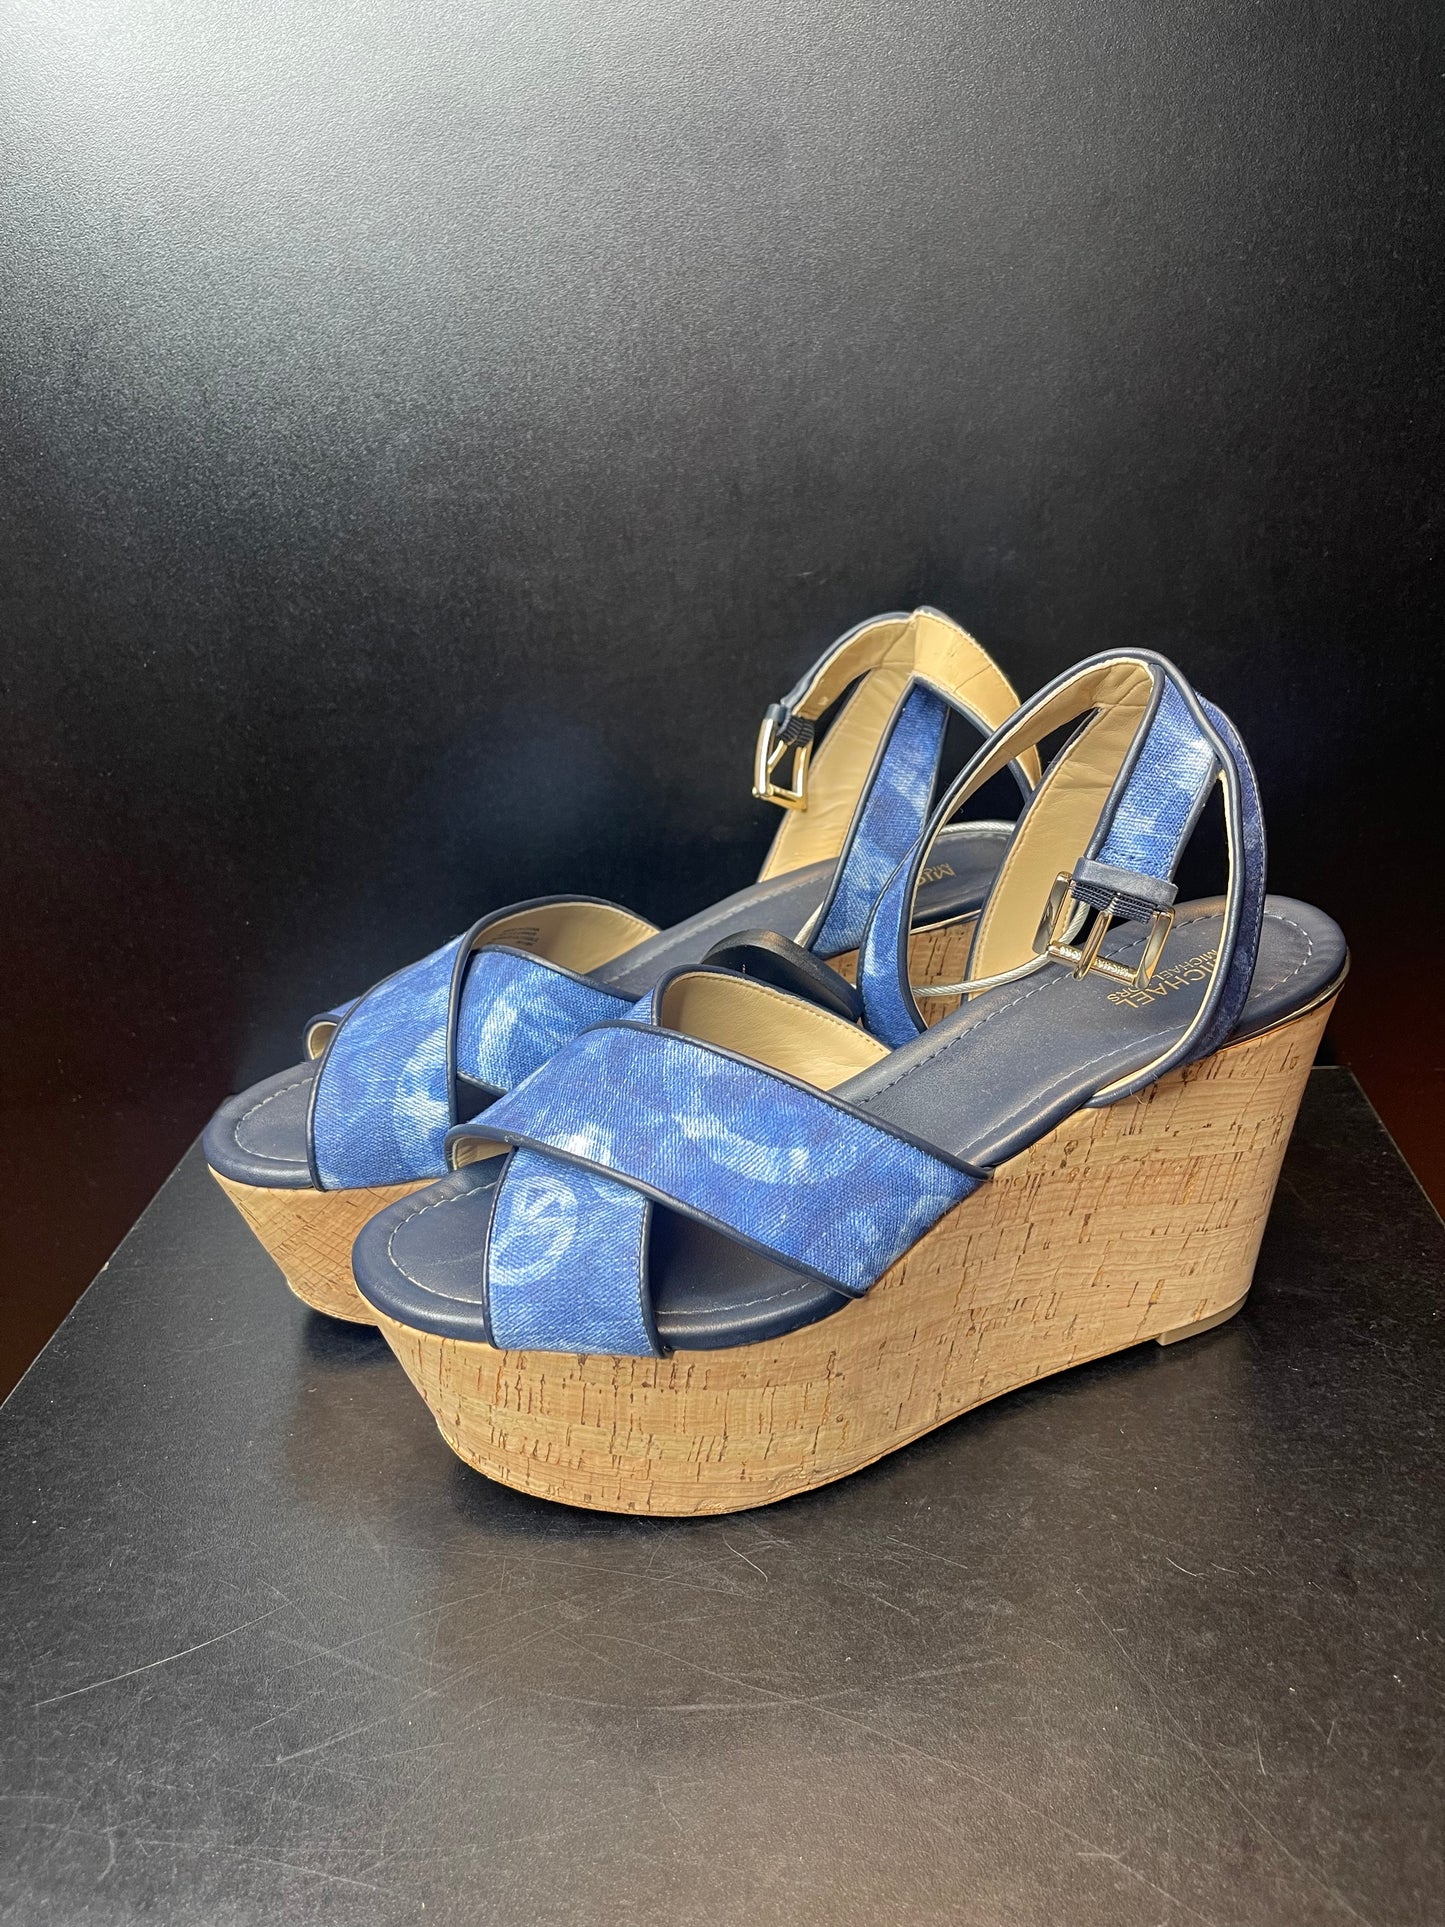 Shoes Heels Wedge By Michael Kors  Size: 9